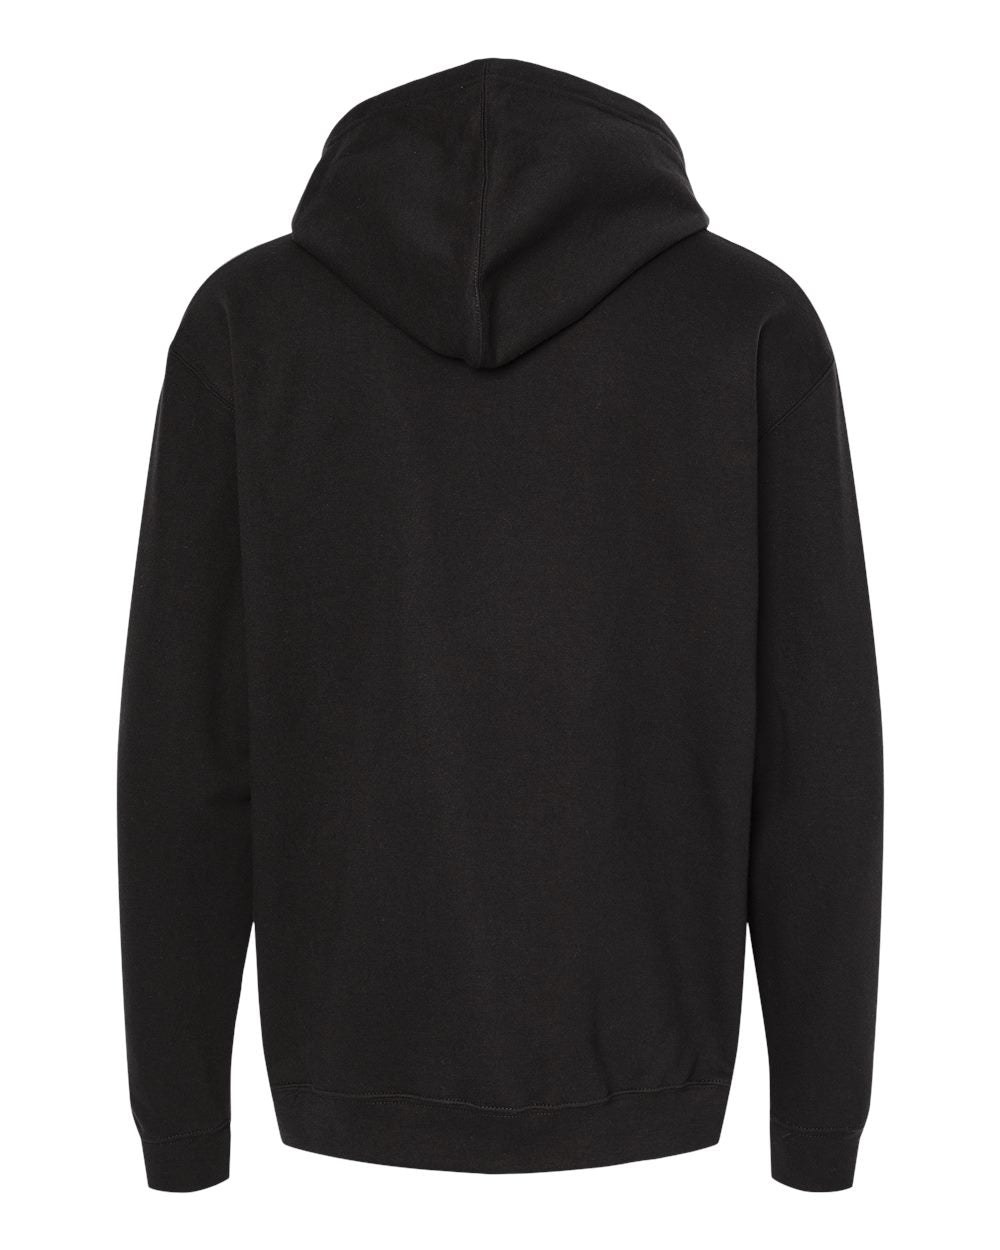 M&O Unisex Pullover Hoodie 3320 #color_Black